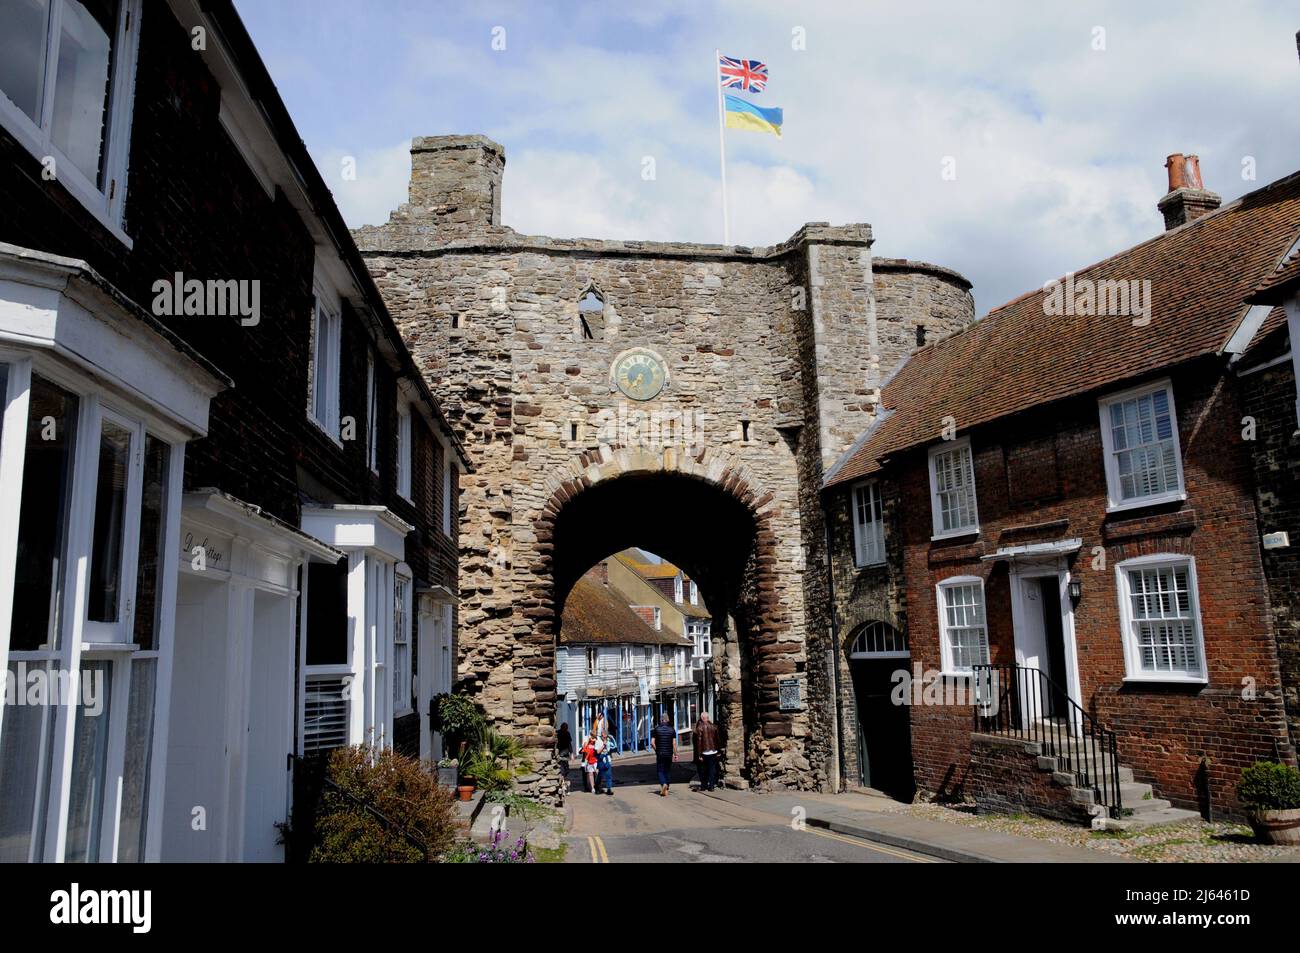 The Landgate Rye, East Sussex, one of four medieval fortified gates into the town. The Landgate is the only one remaining. It is Grade 1 listed. Stock Photo